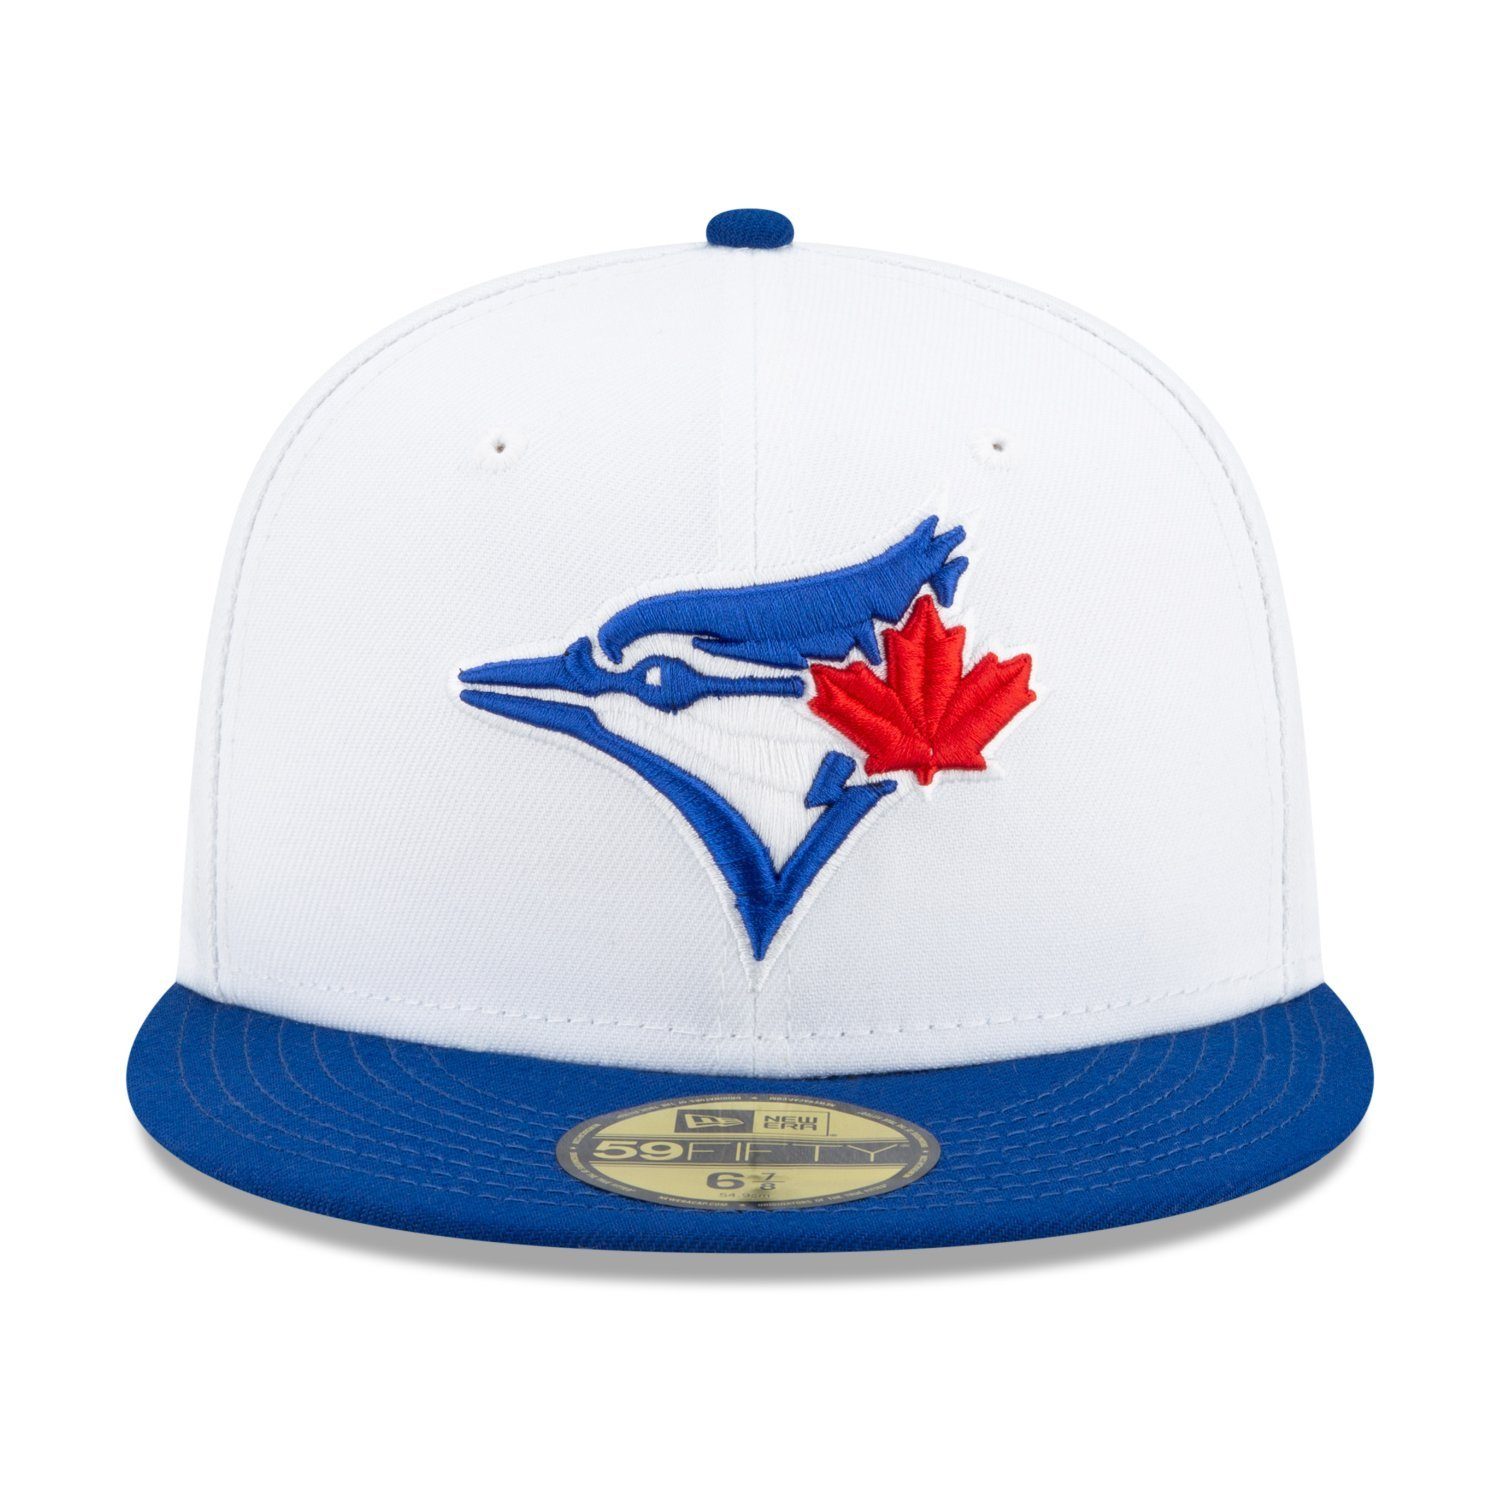 Fitted SERIES Cap 1993 New WORLD 59Fifty Jays Toronto Era